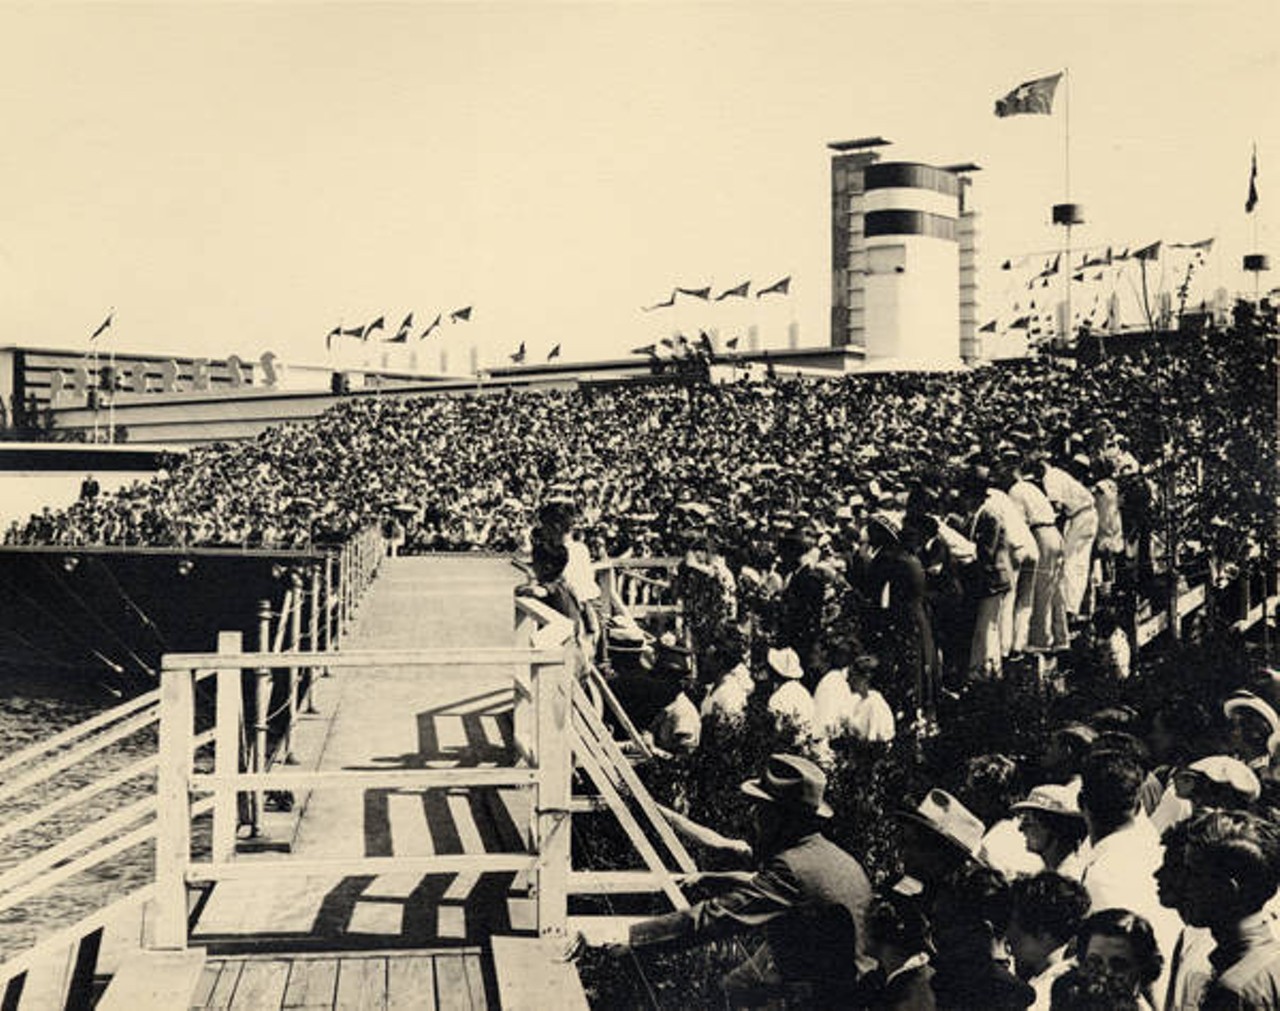 Audience in the stands during a performance at the Marine Theater; Hall of Progress in the background